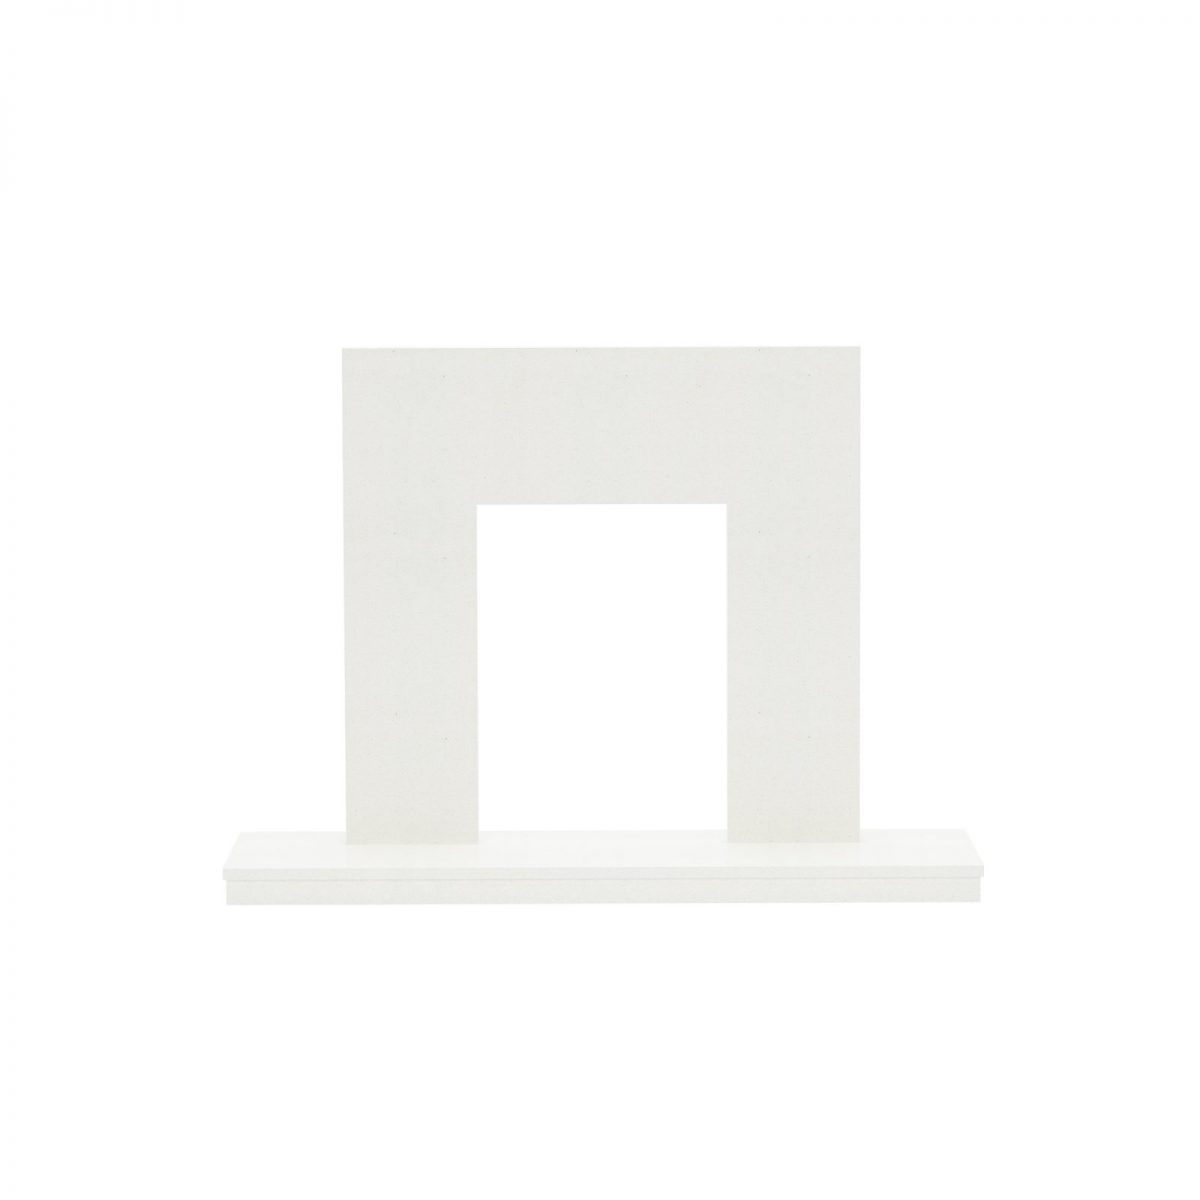 White Marble 1296mm x 400mm (51 x 16″) Standard Lipped Hearth and Back Panel